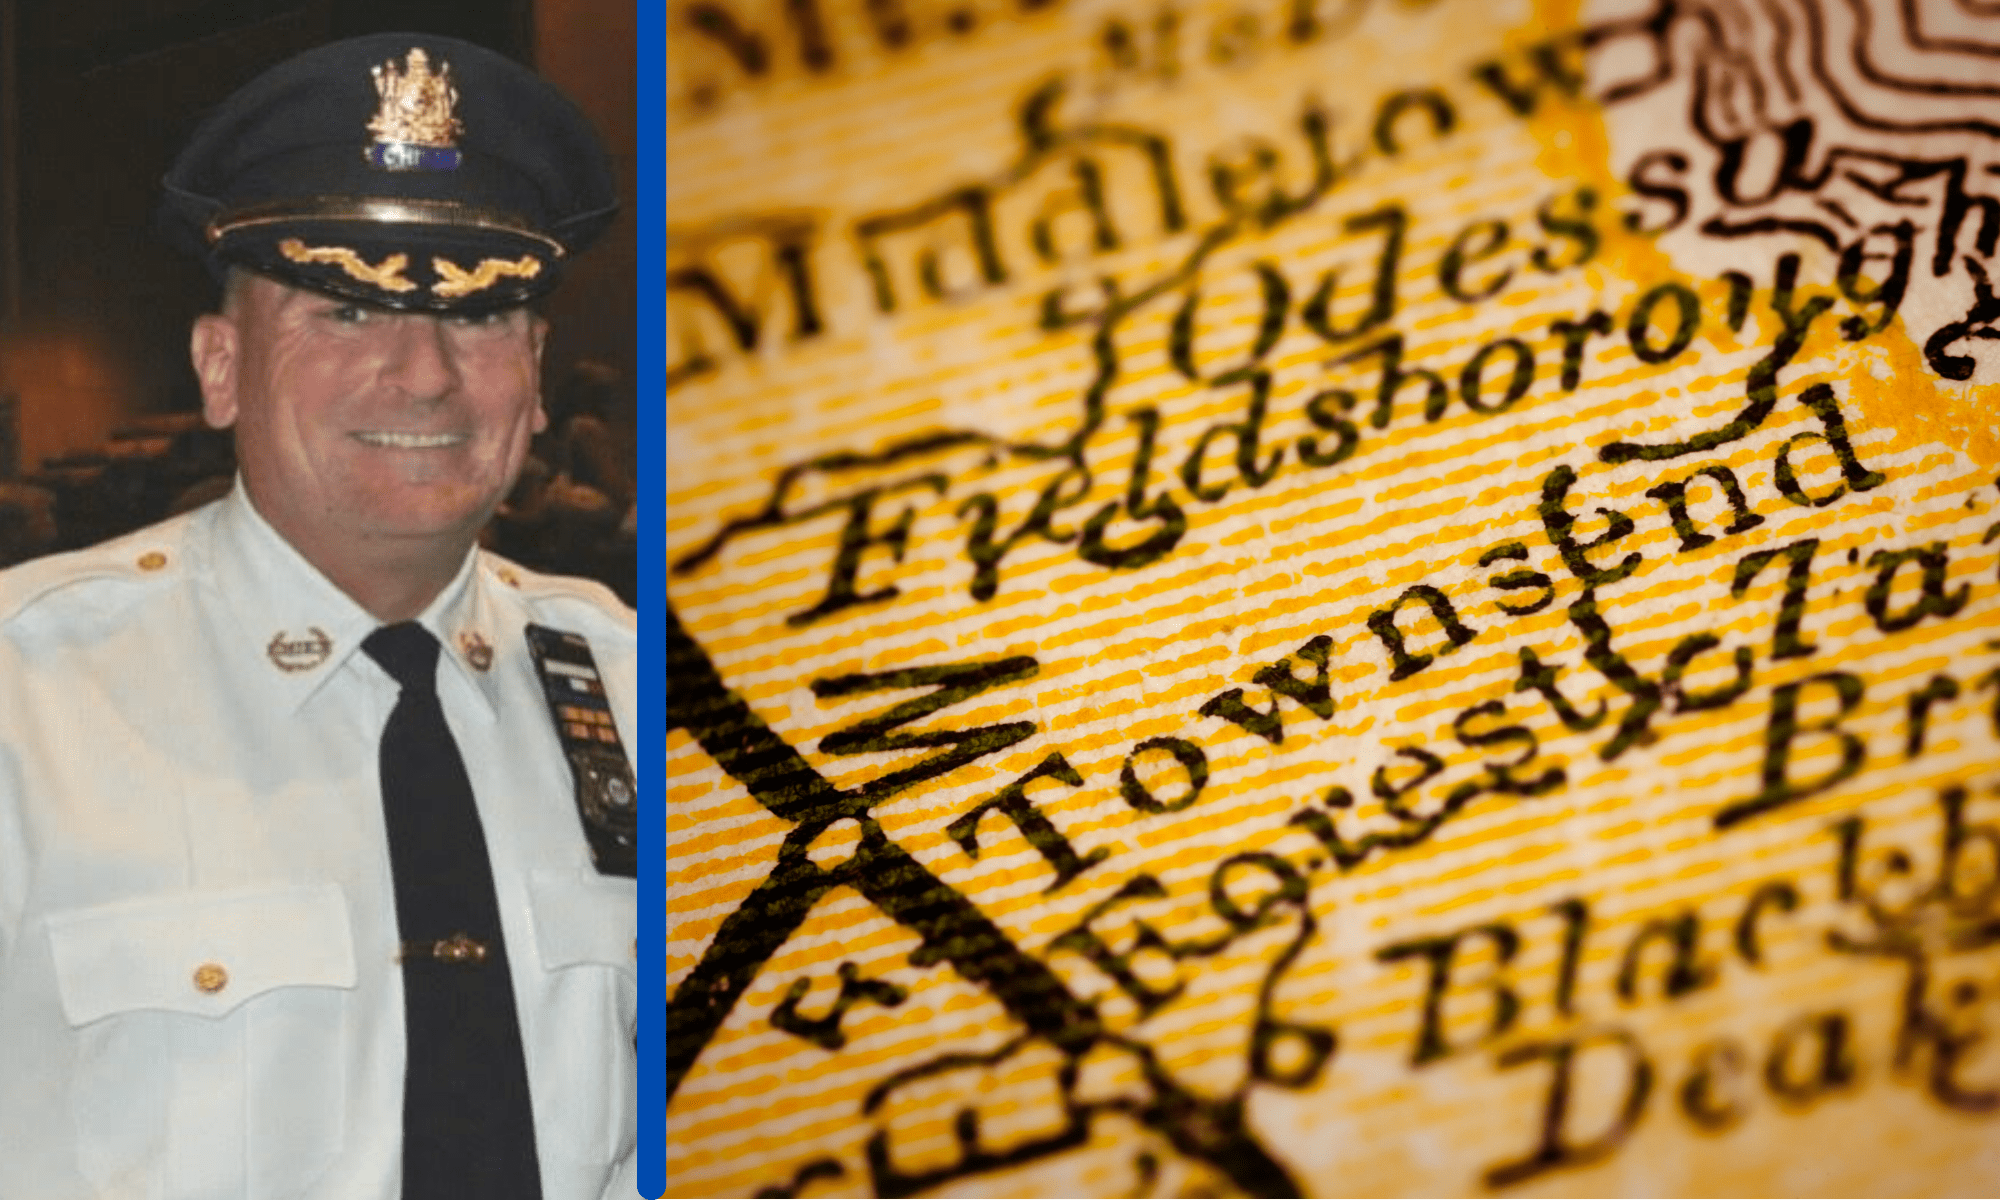 Featured image for “Townsend to restart police department, with Milford man as chief”